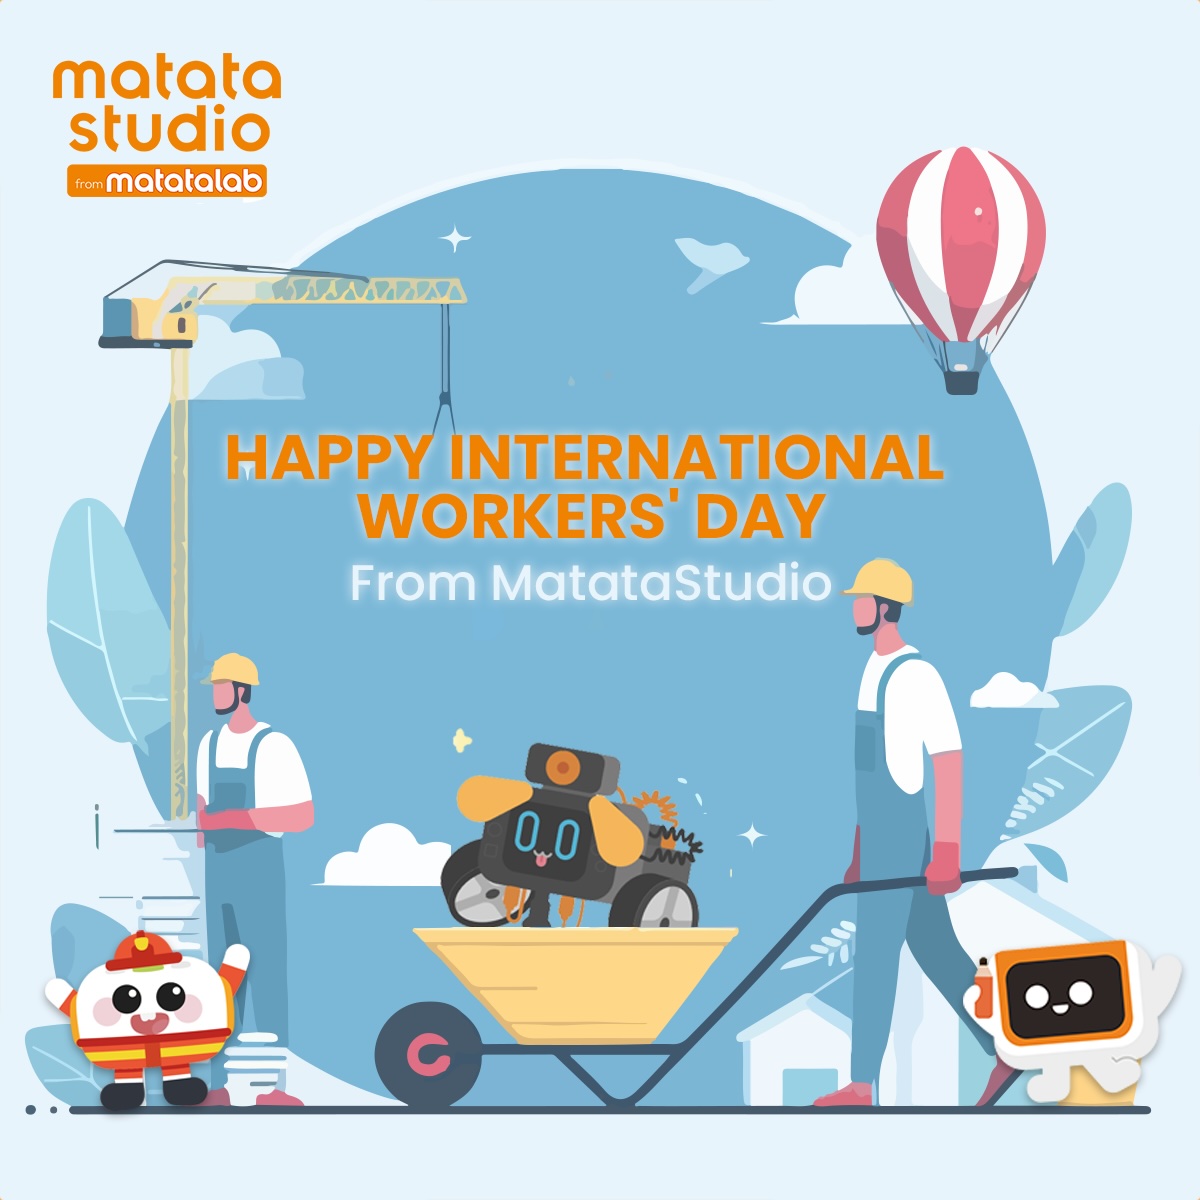 Happy International Workers' Day from MatataStudio! 🎉 Today, we honor the dedication and contributions of workers worldwide, who drive progress and innovation in every industry. Thank you for your efforts! 🤝 #STEMeducation #STEAM #MatataStudio #InternationalWorkersDay